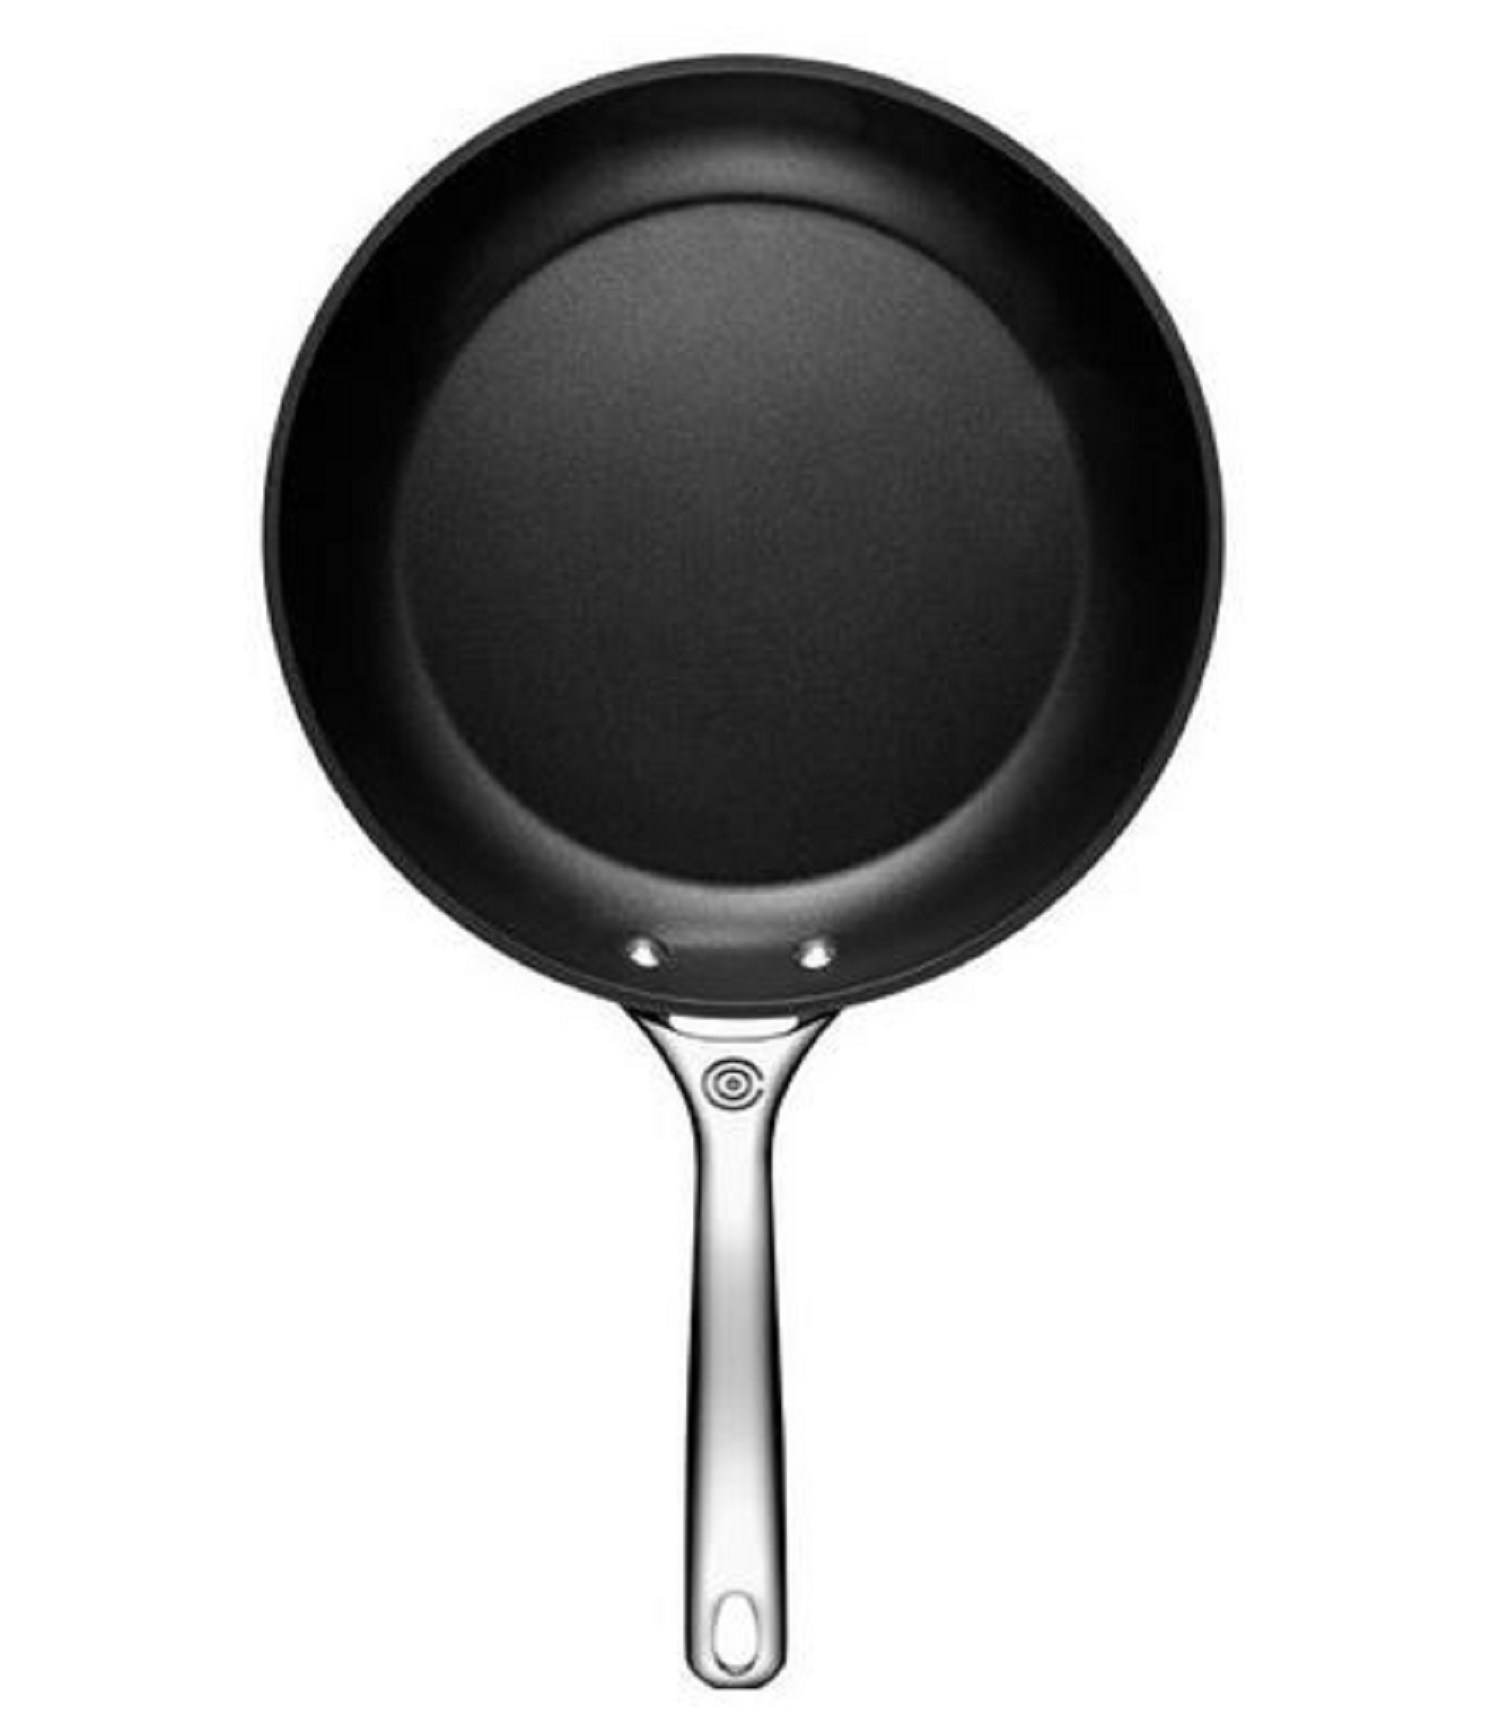  Ailwyn 8 Nonstick Small Frying Pan with Lid - 8 Inch